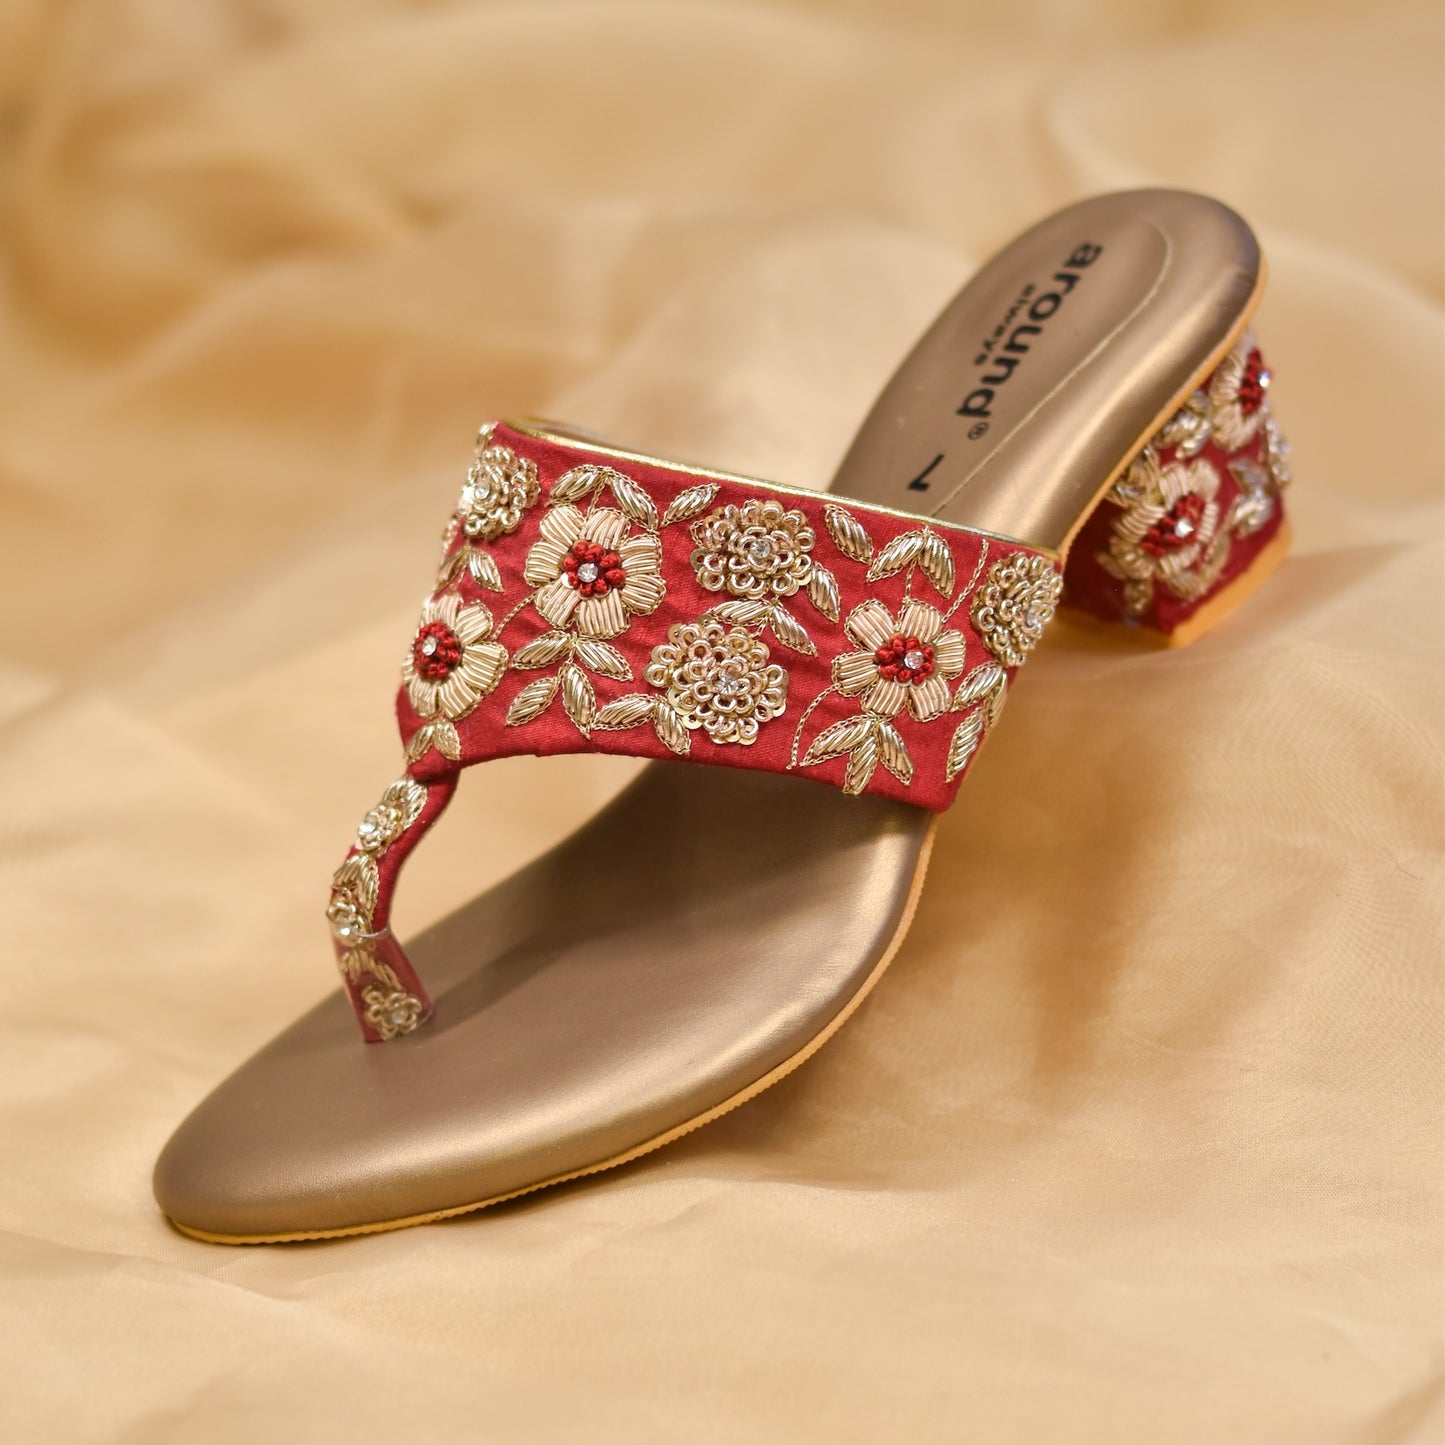 Bridal block heels in red for traditional wedding